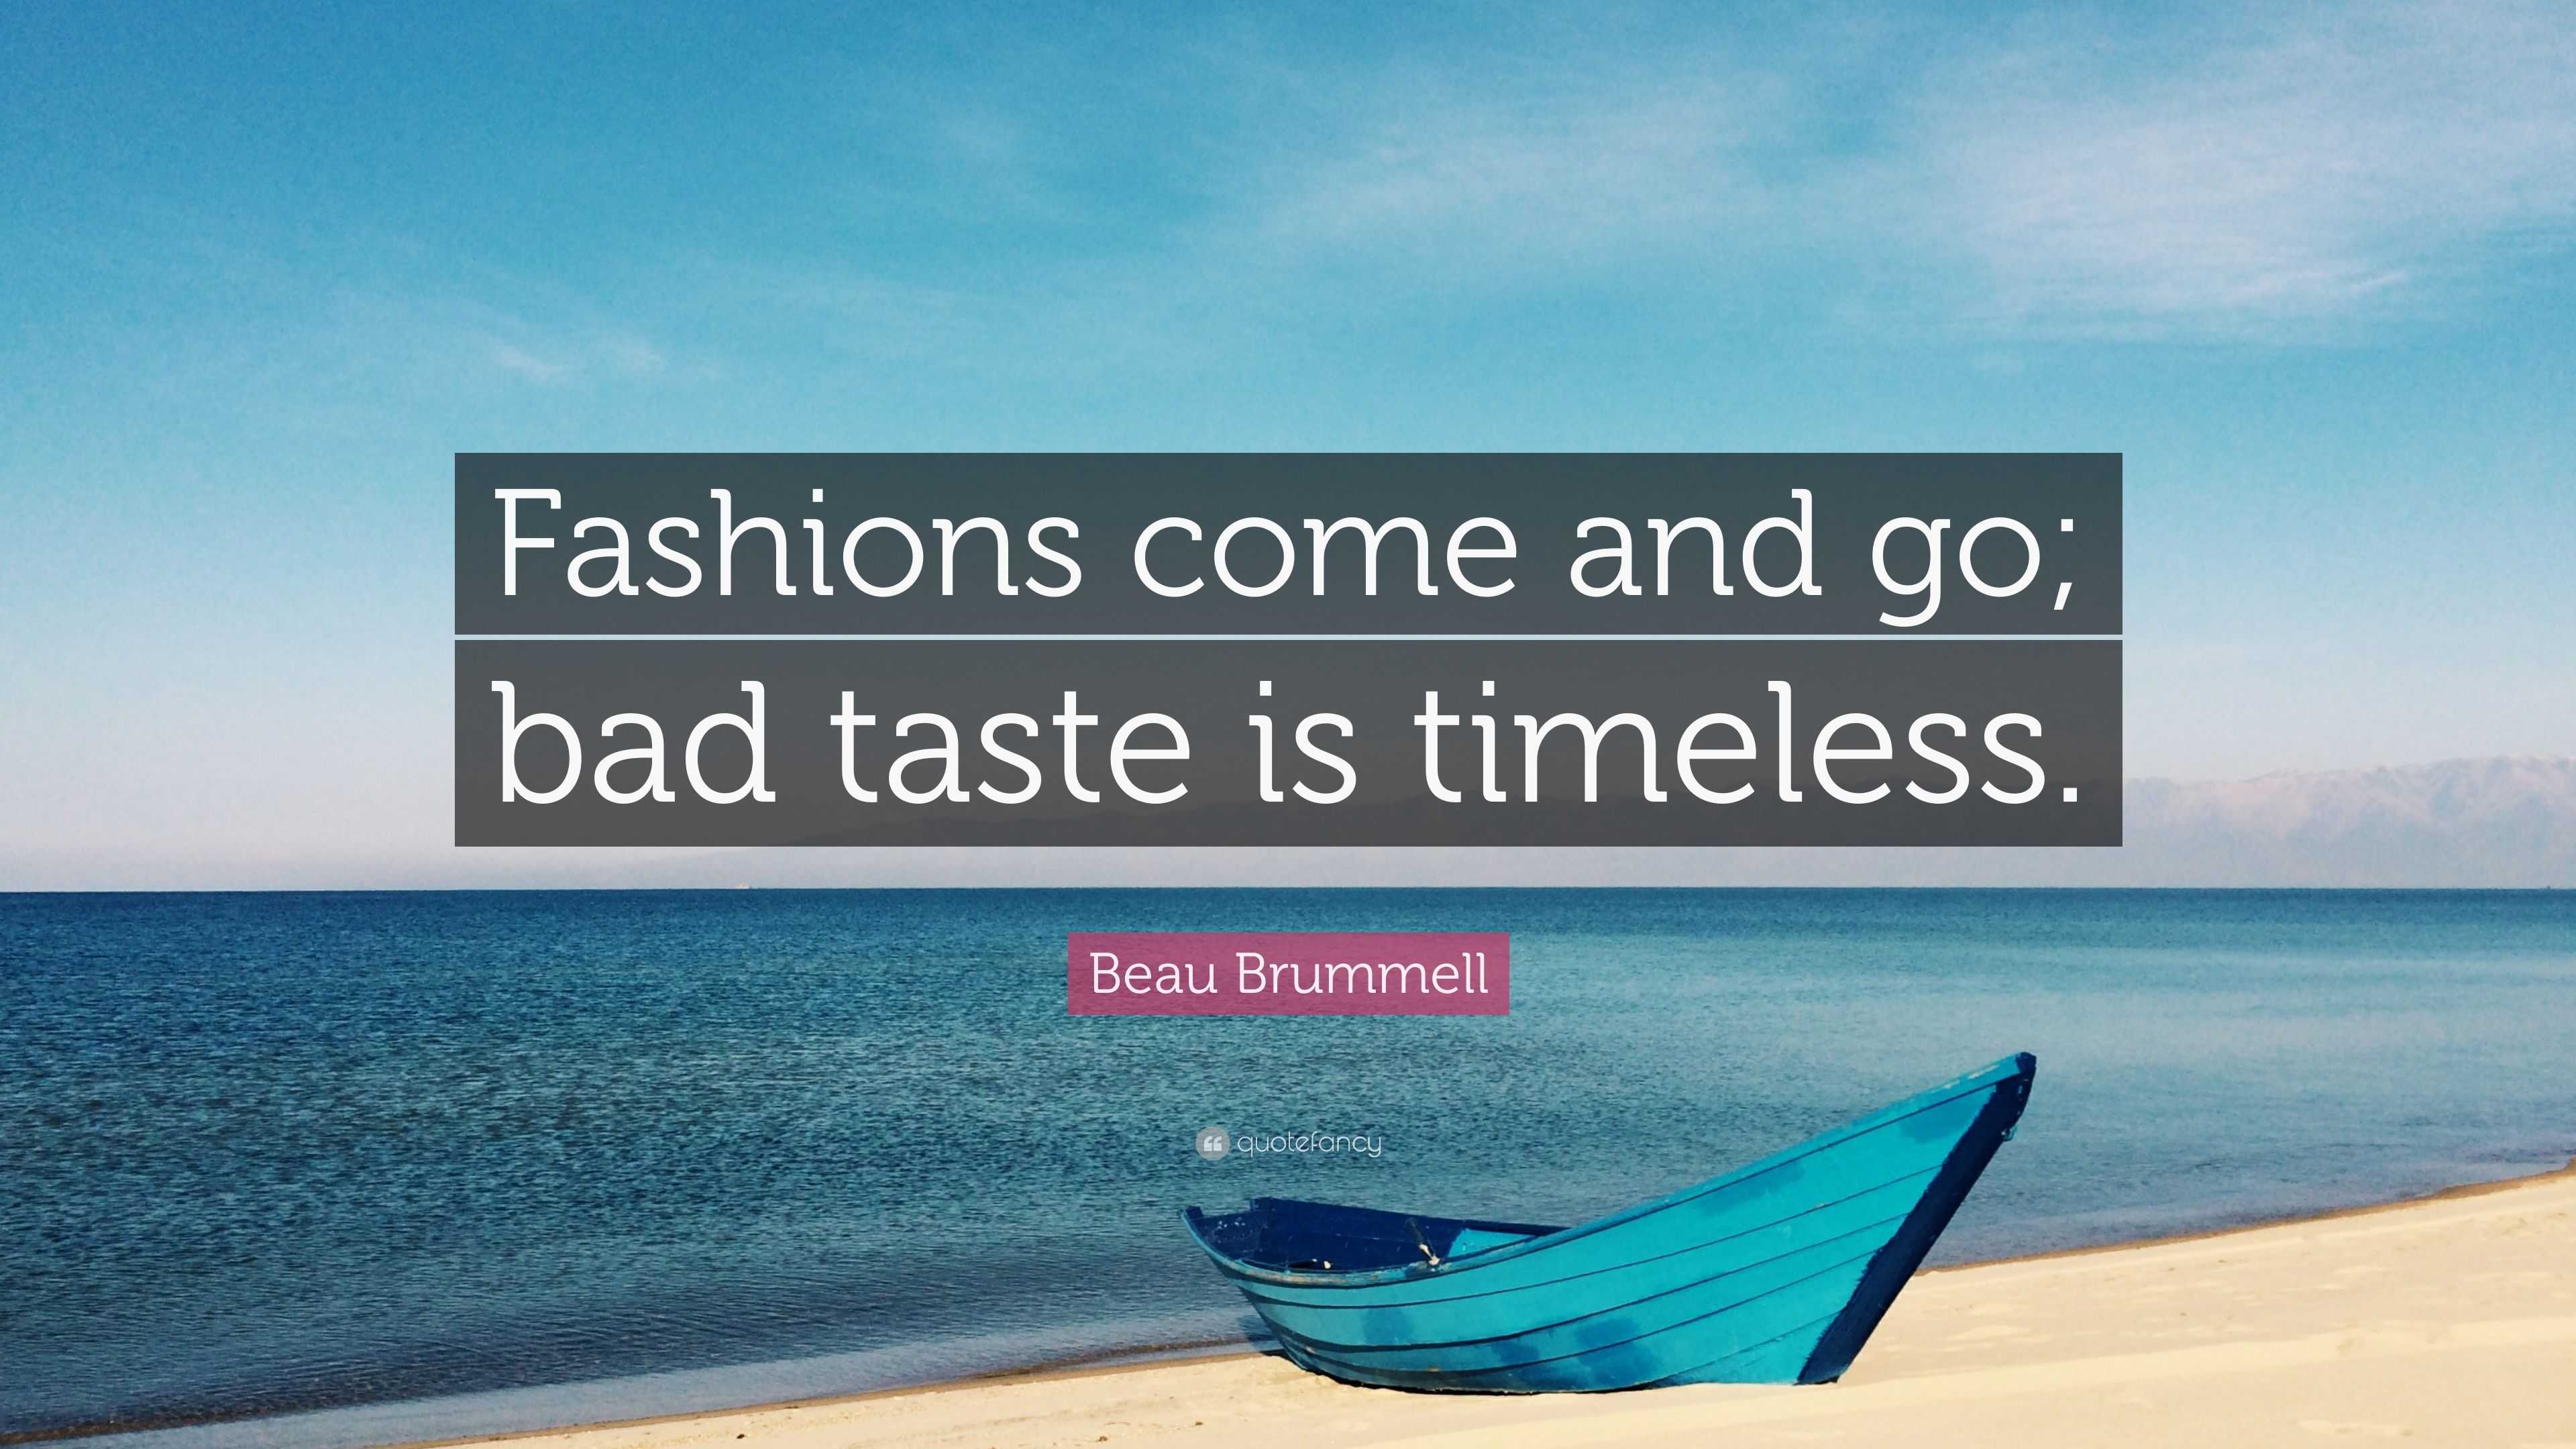 Beau Brummell Quote: “Fashions come and go; bad taste is timeless.”